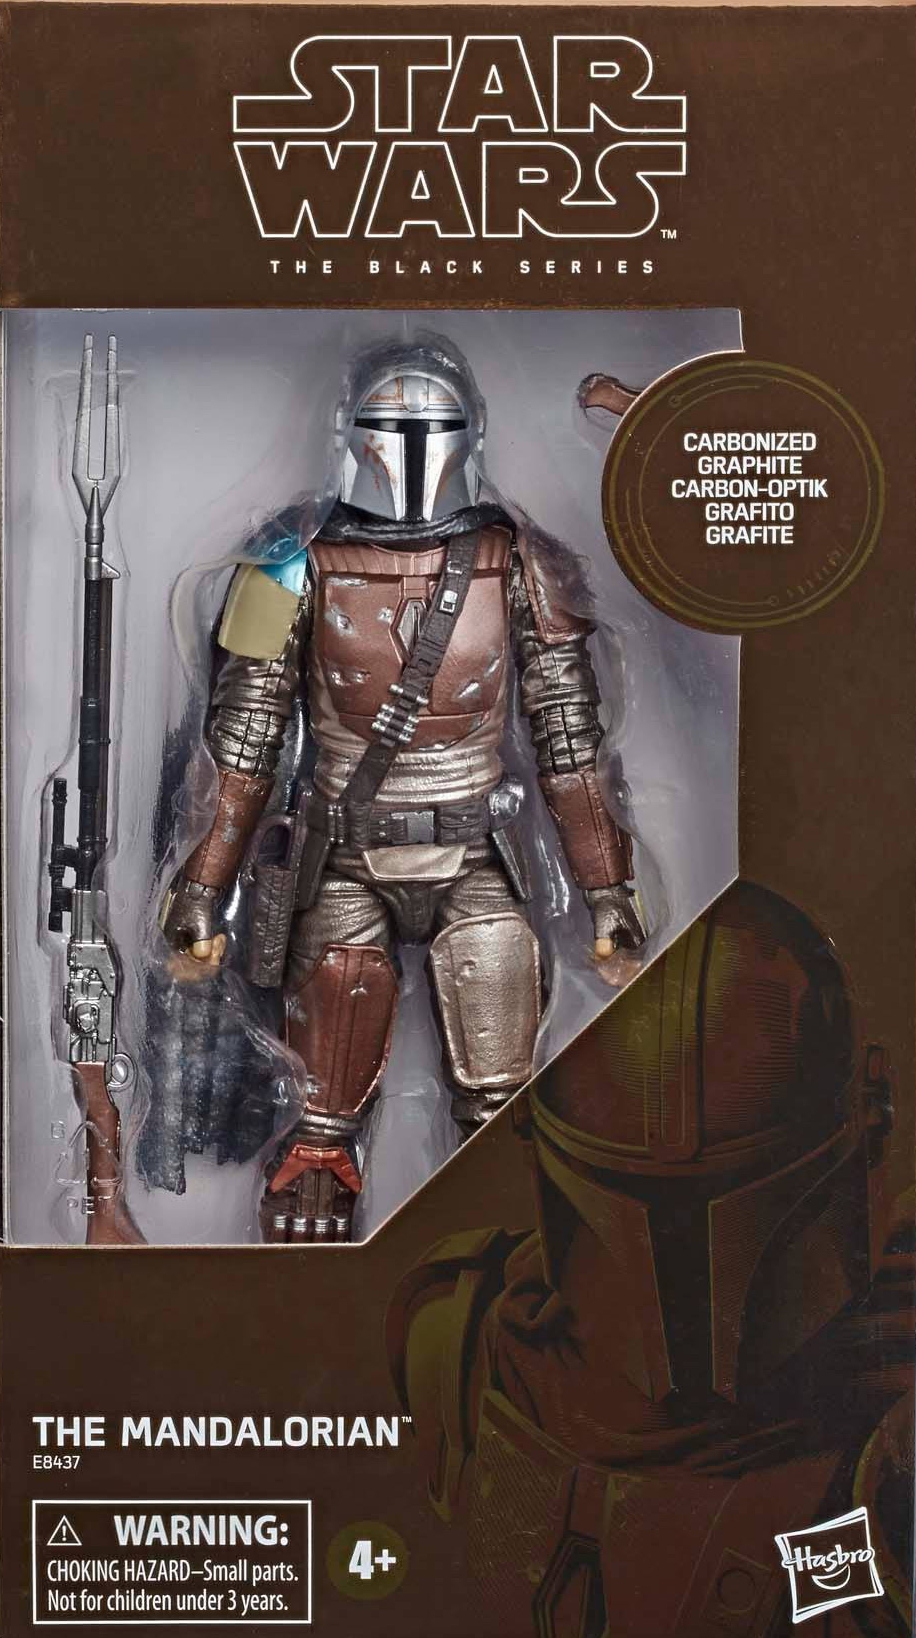 The Mandalorian Carbonized (Star Wars) – Time to collect